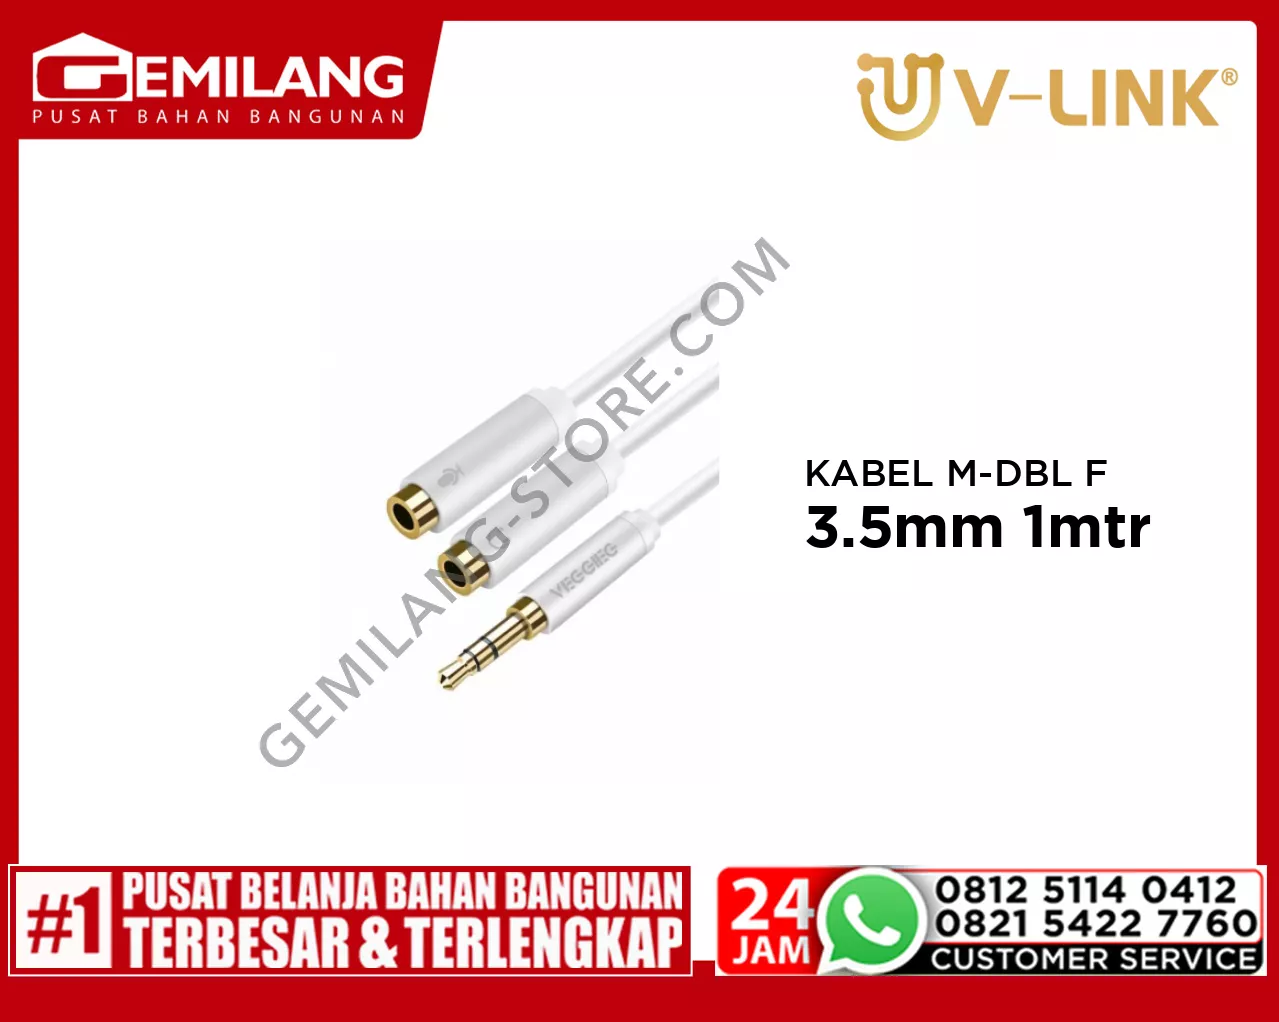 V-LINK KABEL MALE TO DOUBLE FEMALE VEGGIEG 3.5mm AH2-W 1mtr